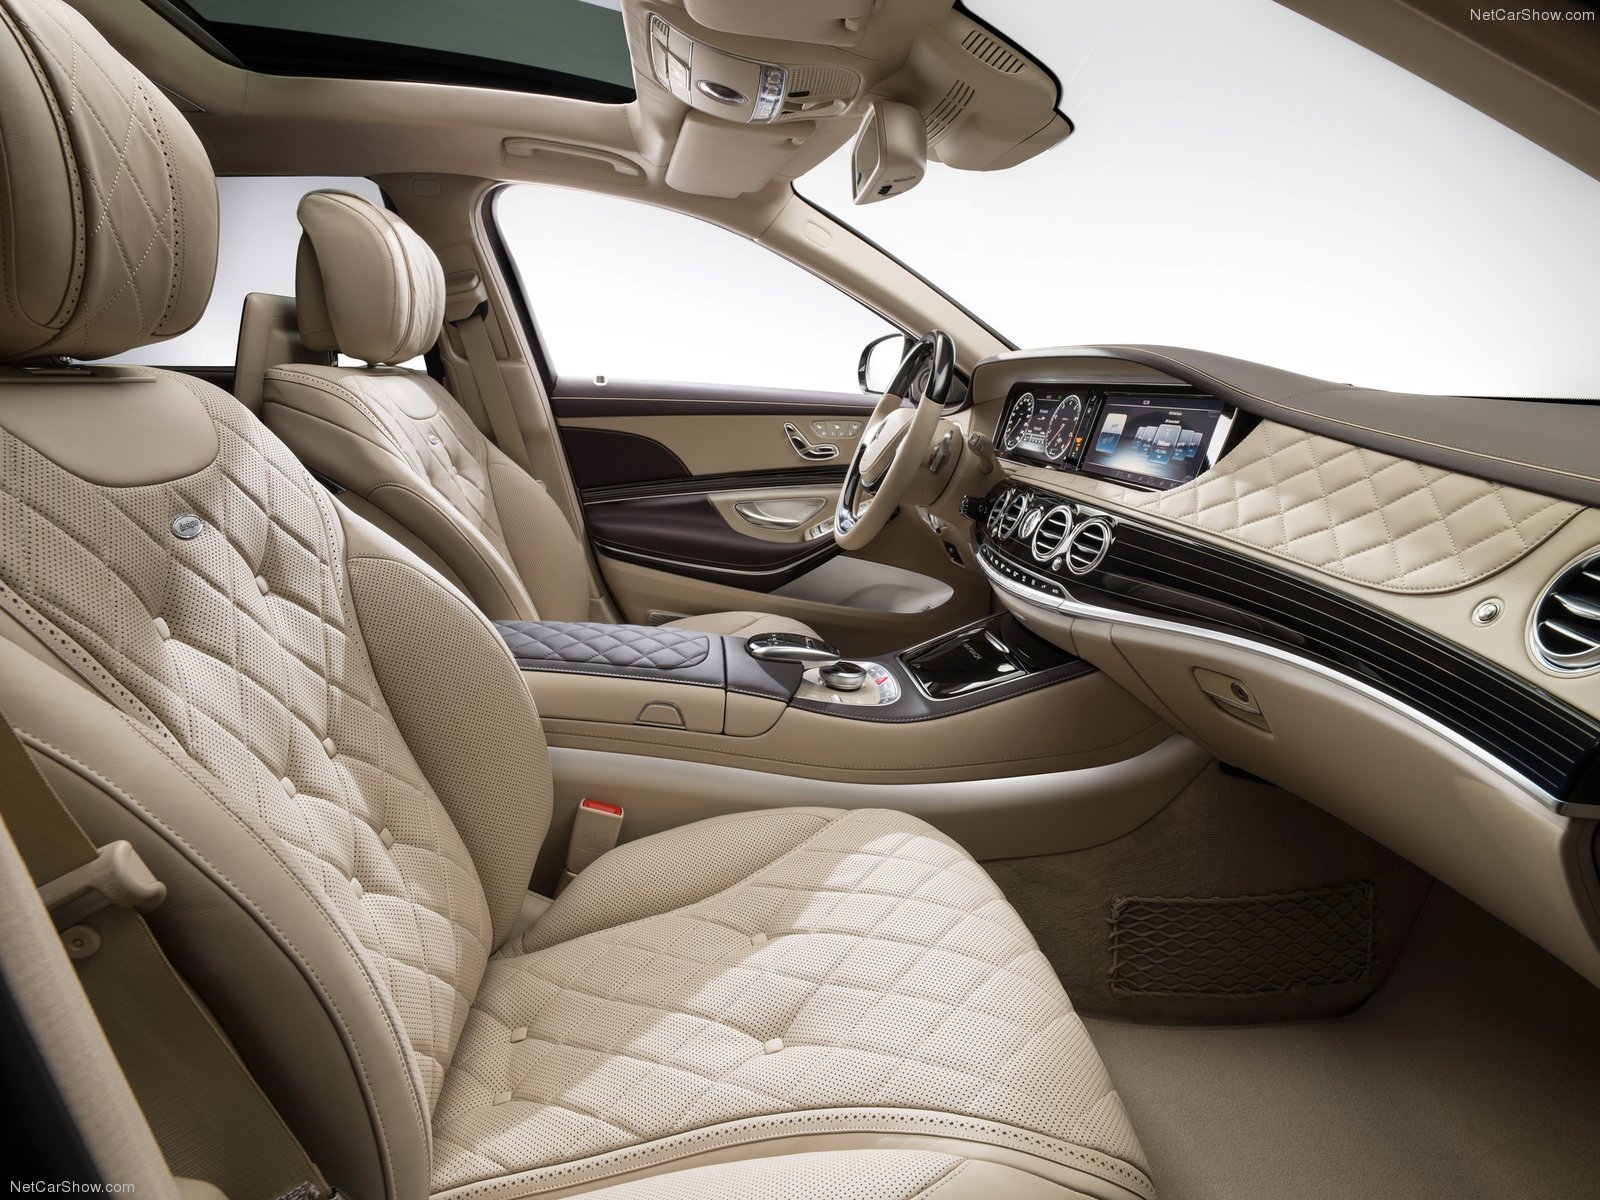 2015, Mercedes, Benz, S class, Maybach, Luxury, Supercars, Cars, Black Wallpaper